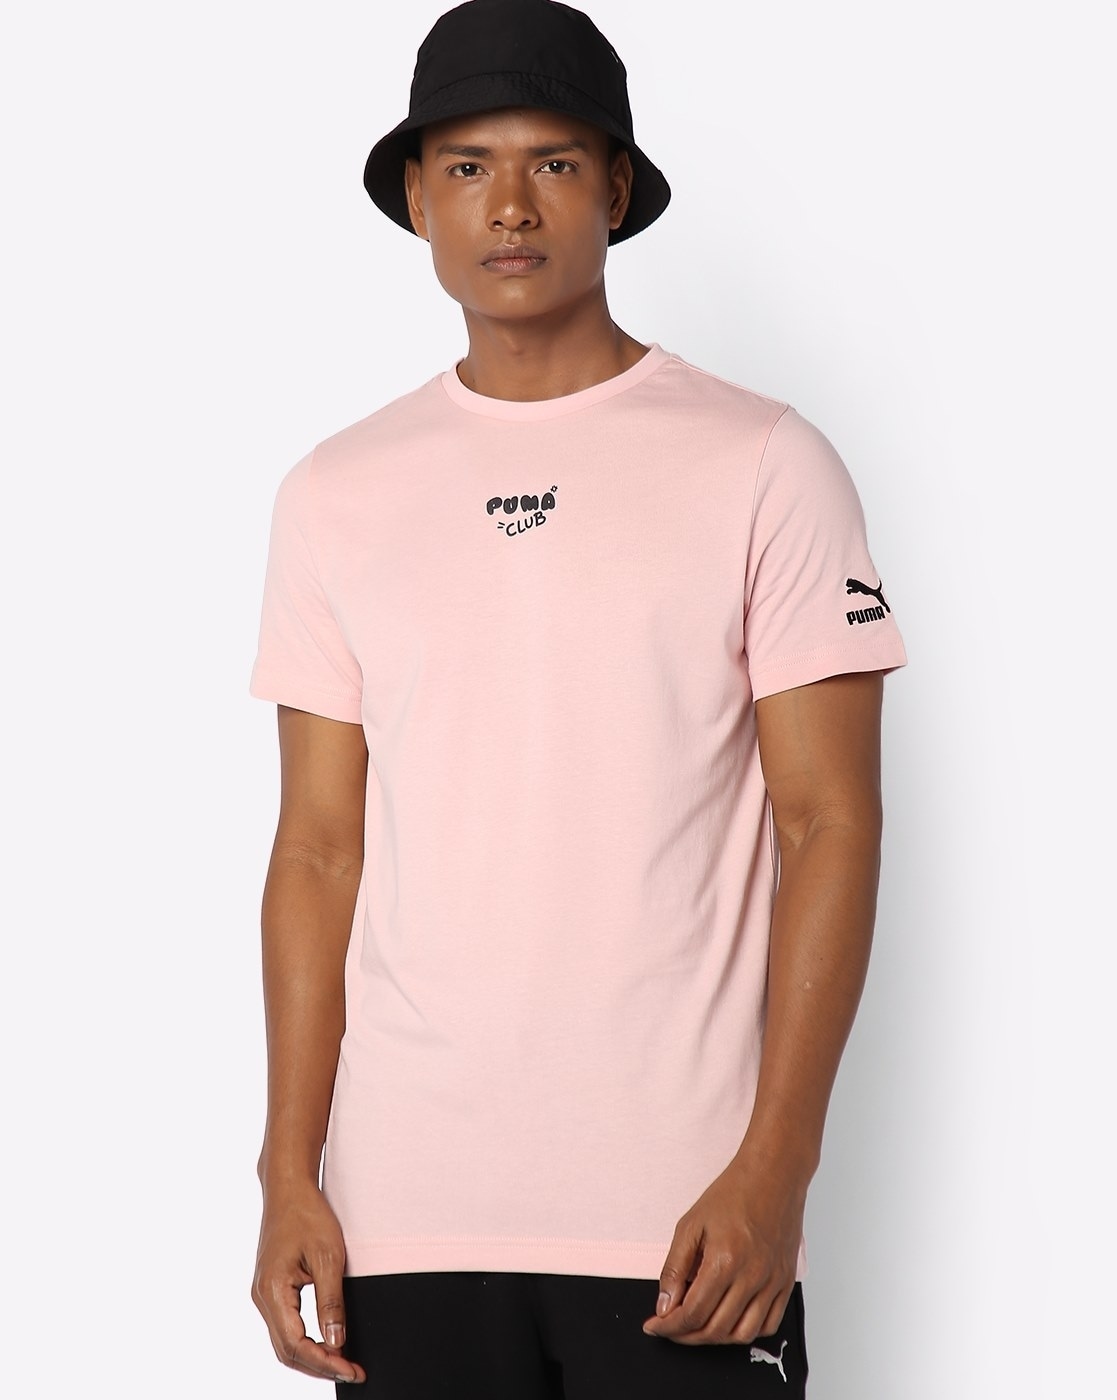 Men Buy by Tshirts Puma Online for Pink